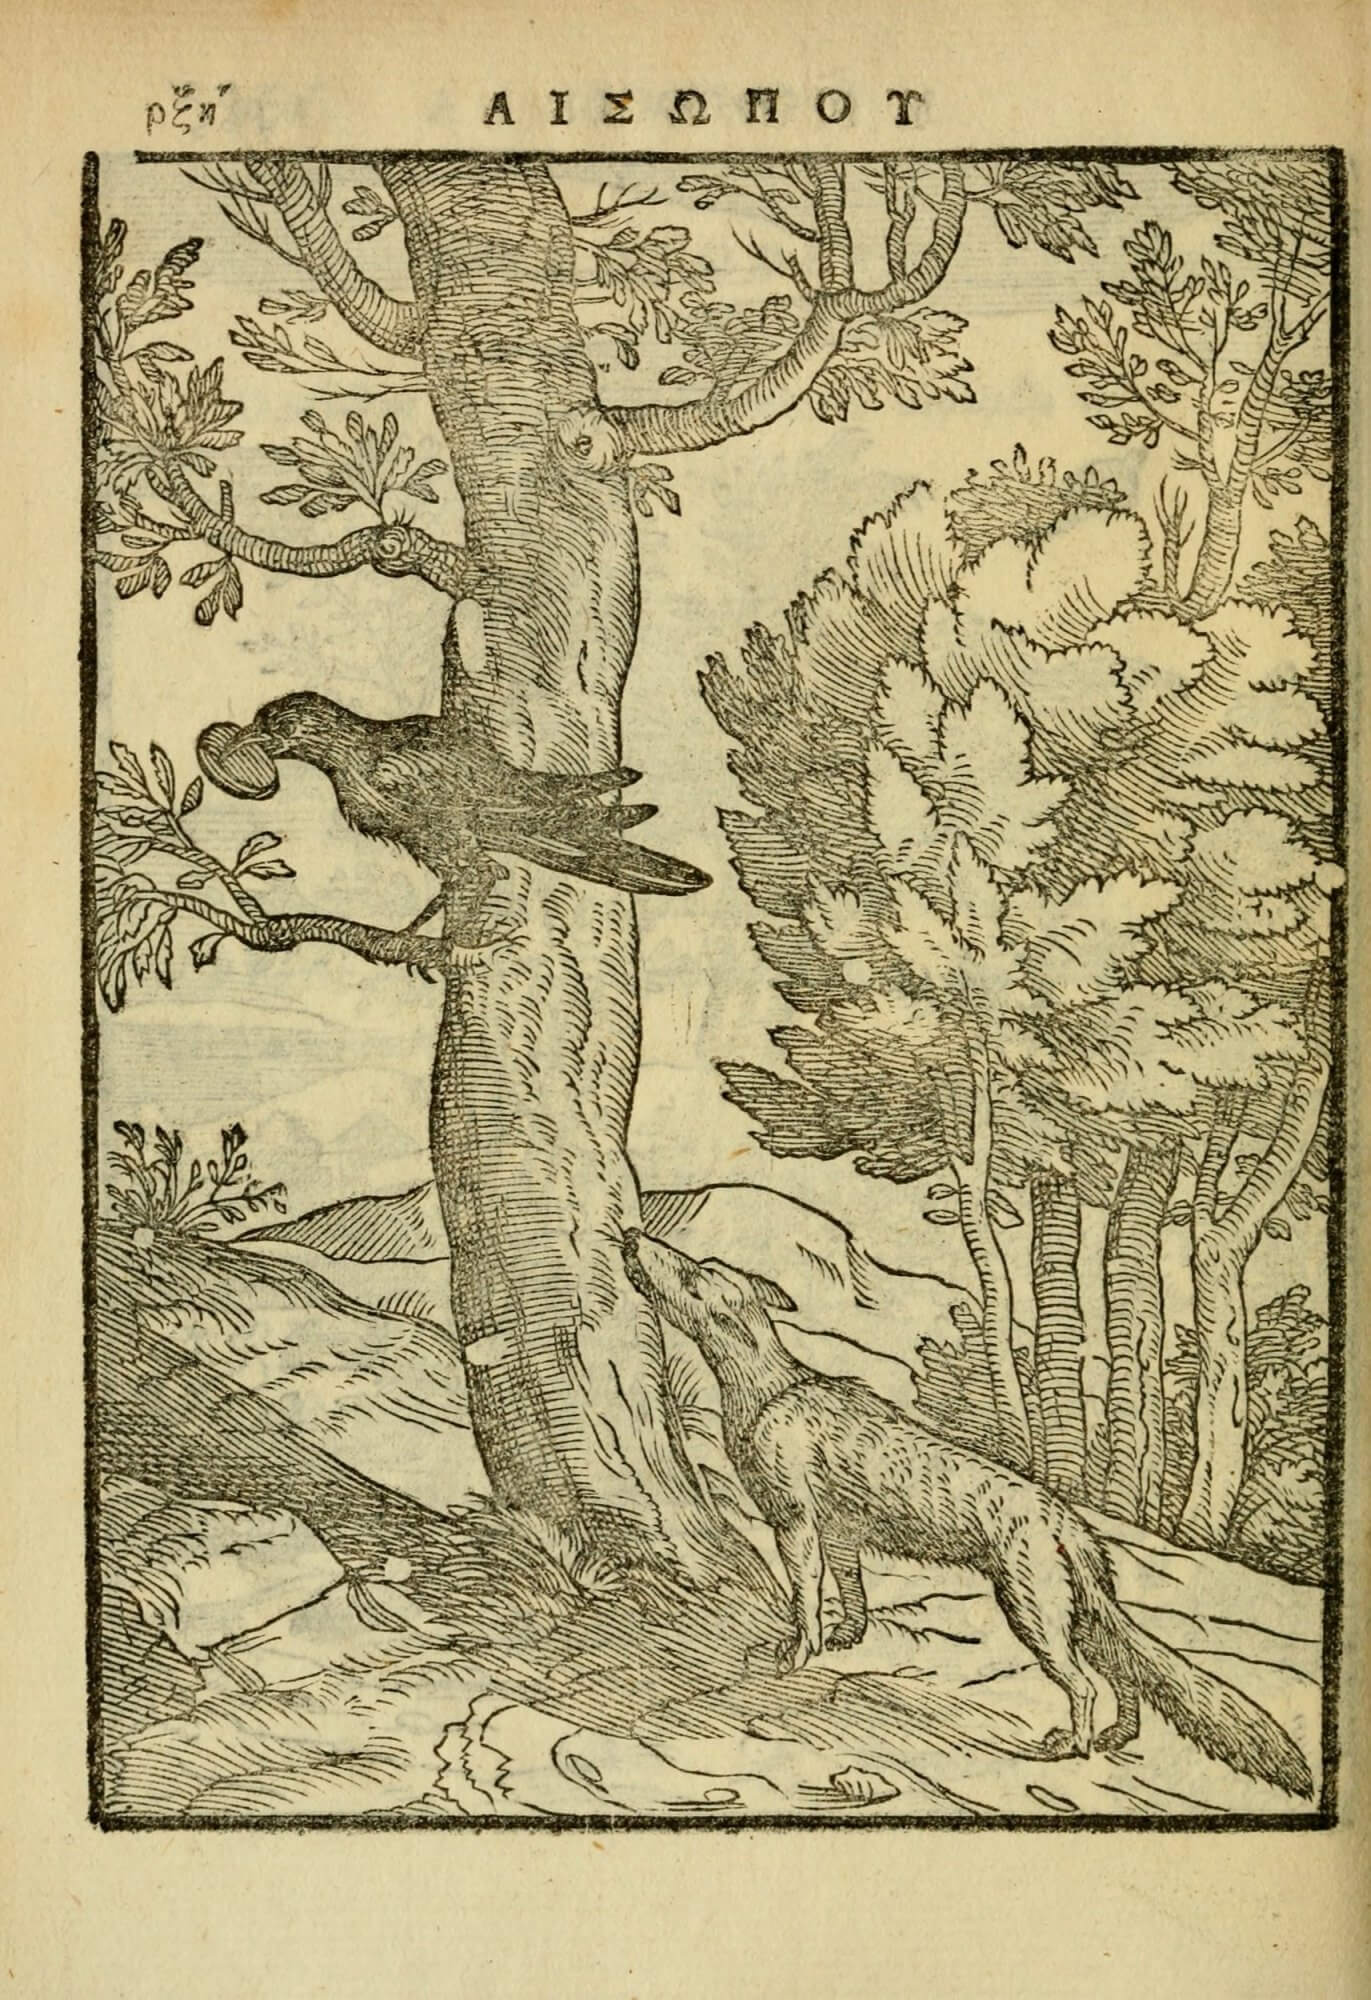 A woodcut illustrating Aesop's fable of the fox and the crow, which in this book is printed to face the illustration (you can see the text here).